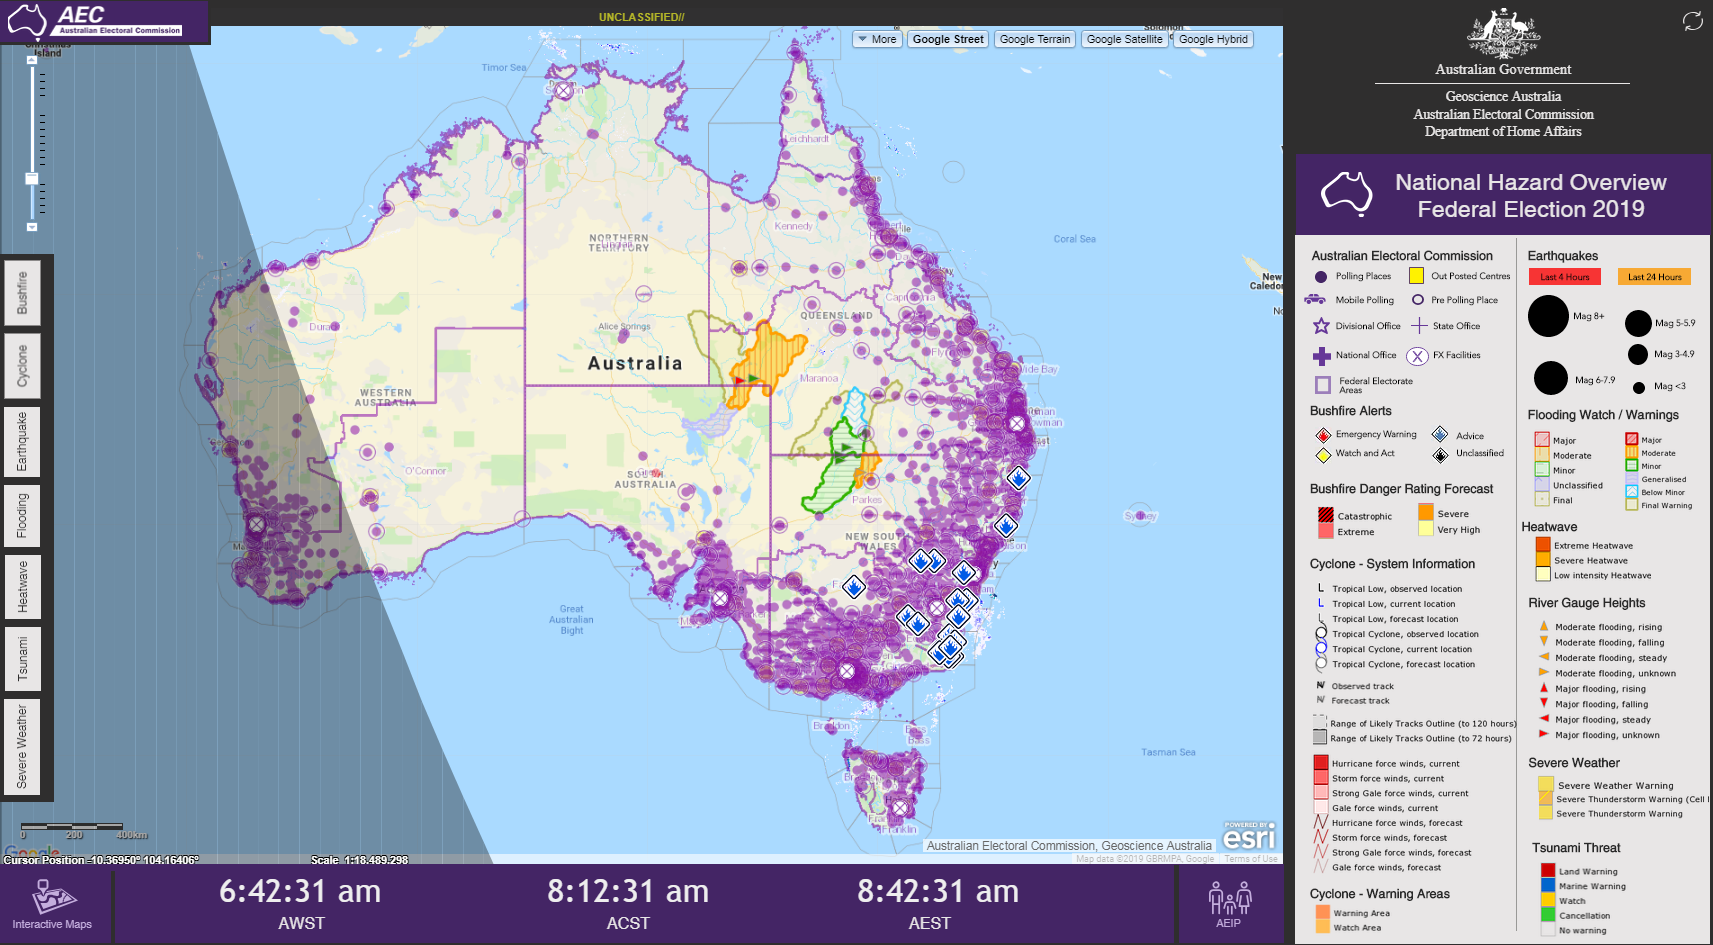 A map of Australia and extensive key with many symbols and colours to show election data and potential natural hazards.